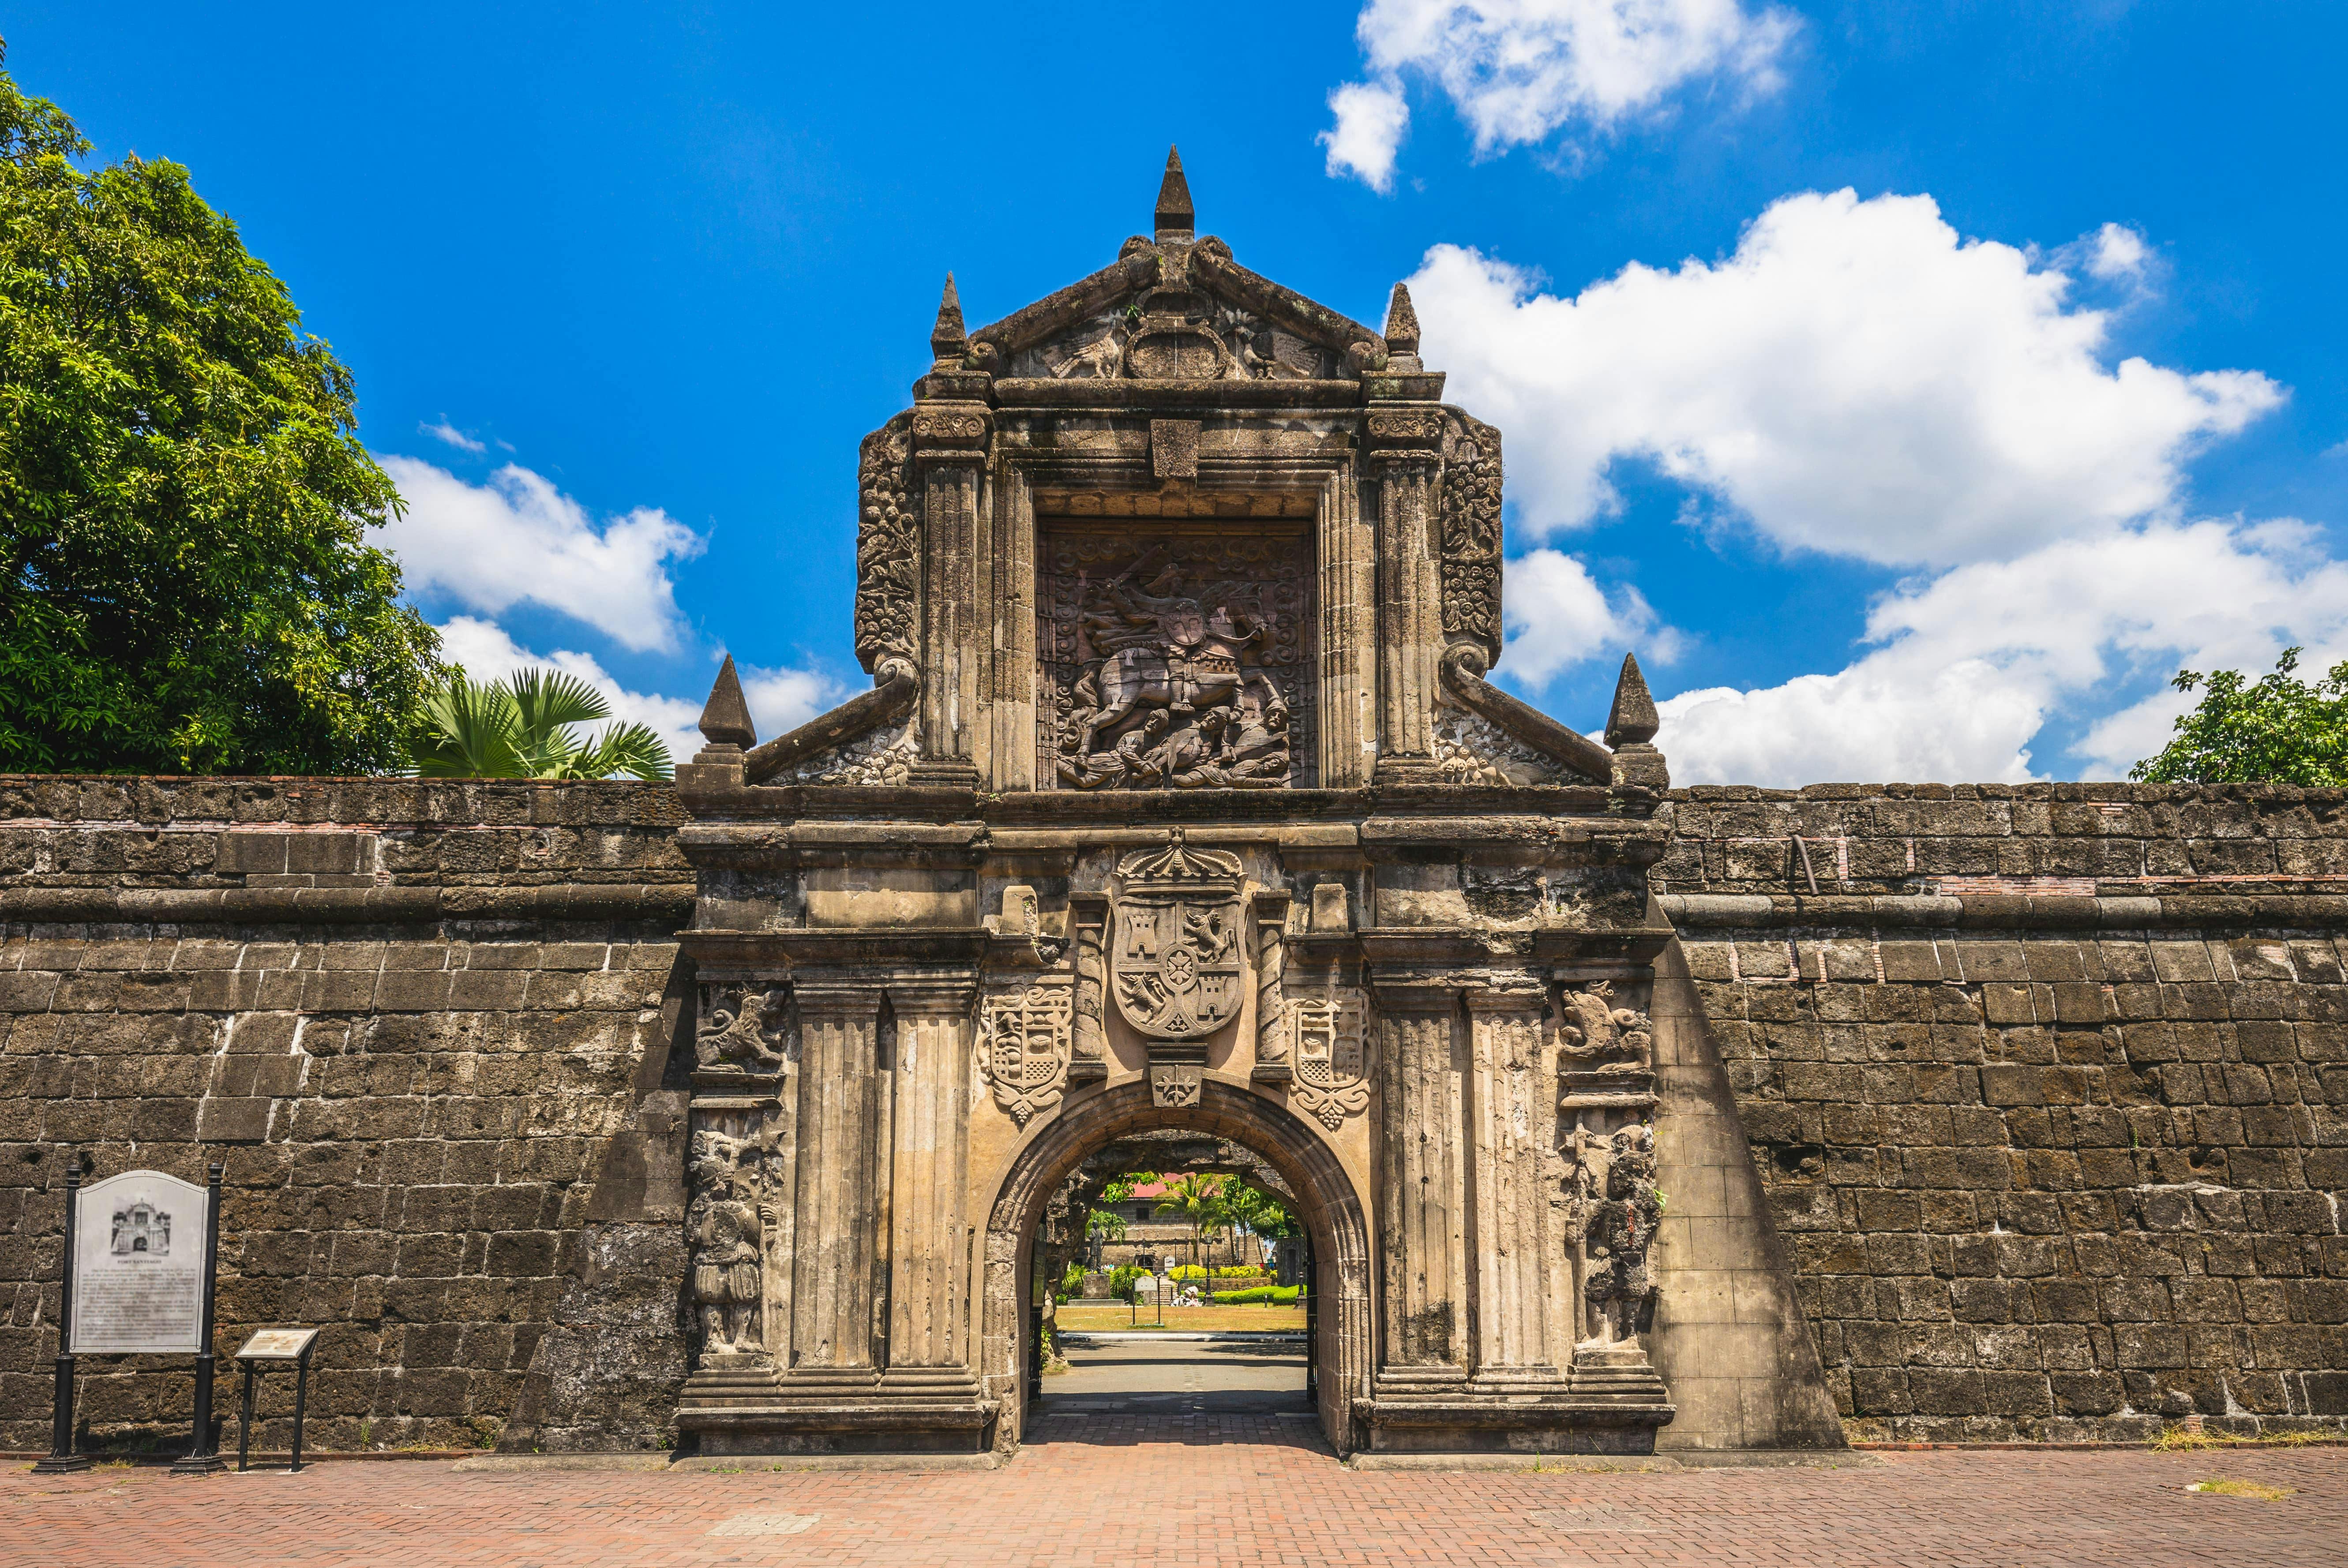 Old stone structure of Fort Santiago in Intramuros